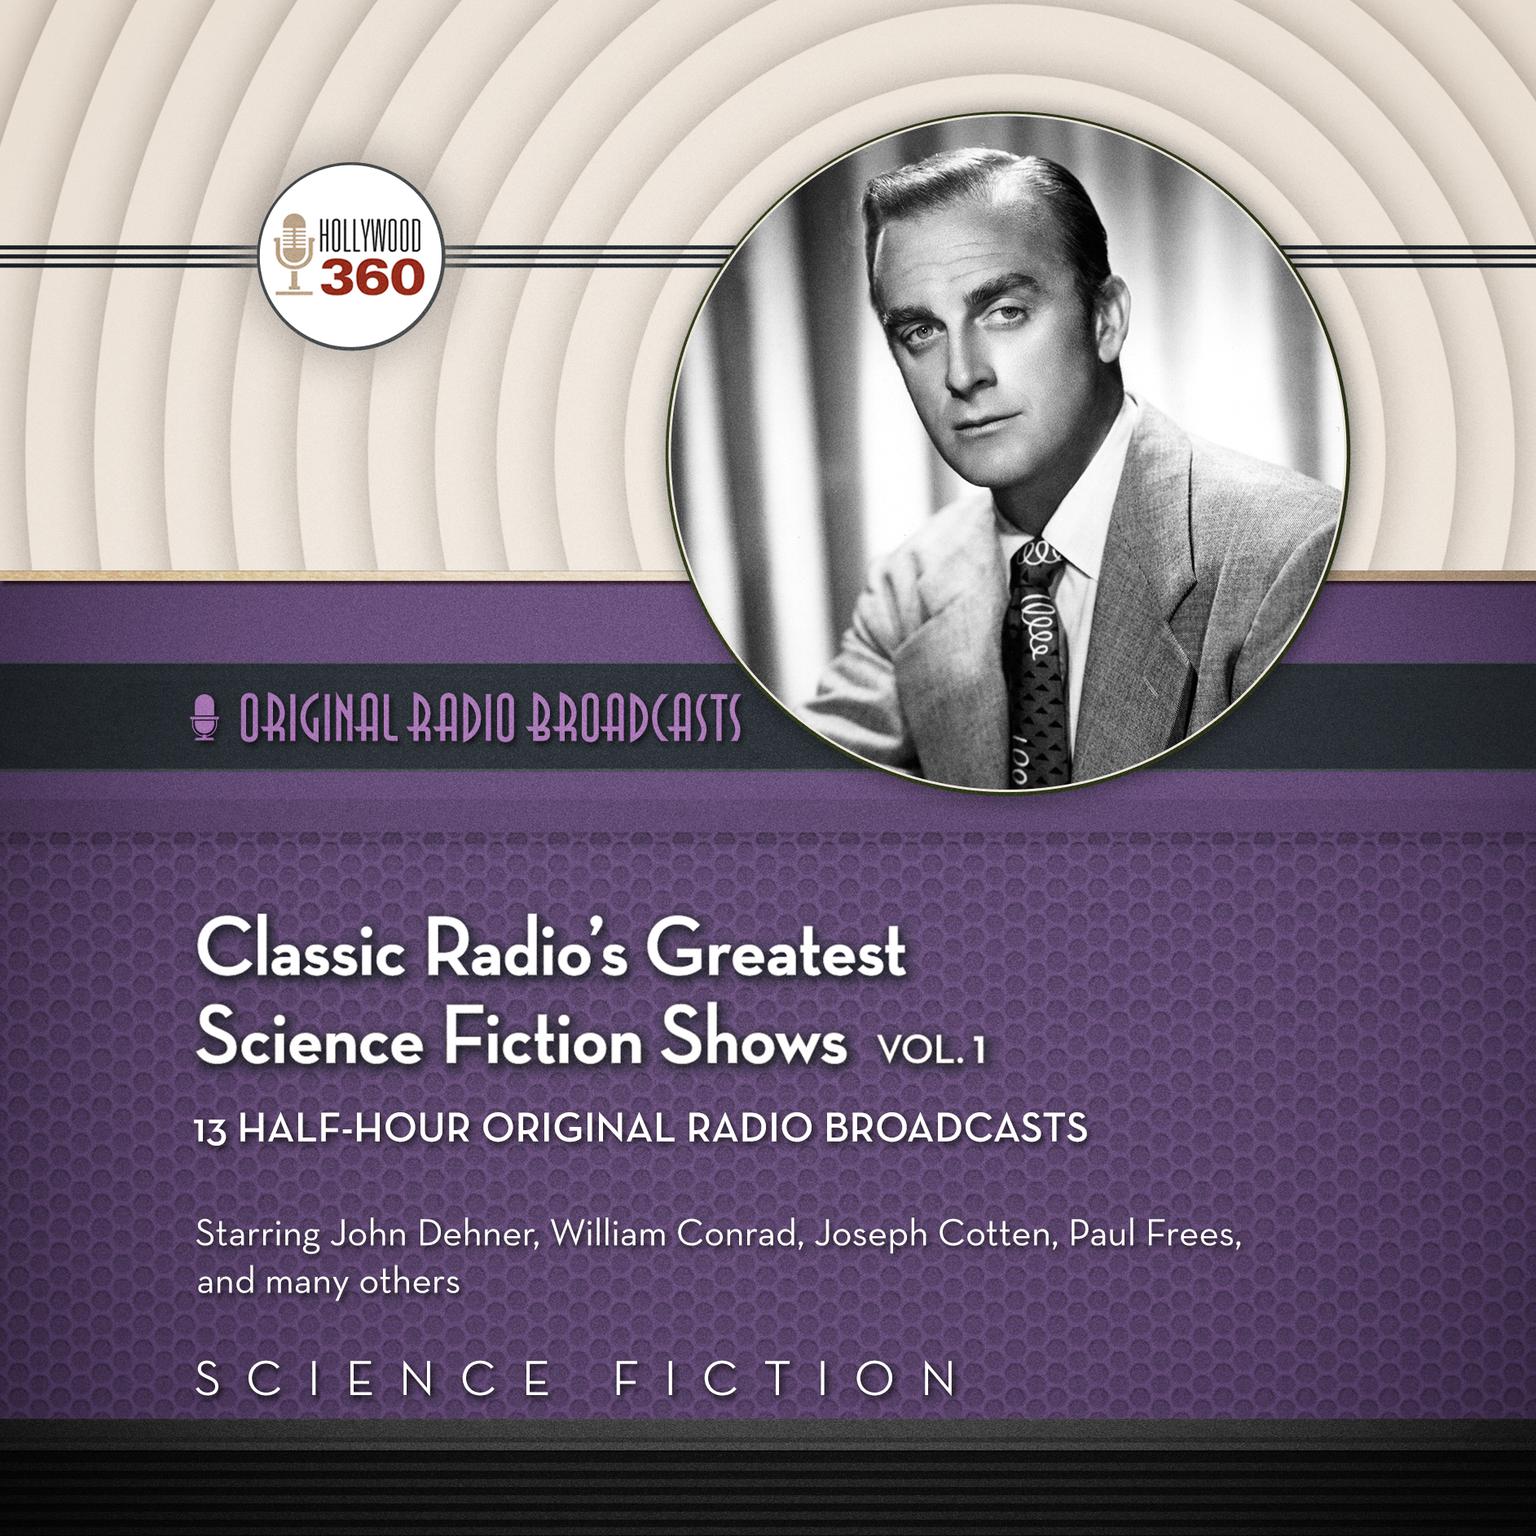 Classic Radio’s Greatest Science Fiction Shows, Vol. 1 Audiobook, by Hollywood 360